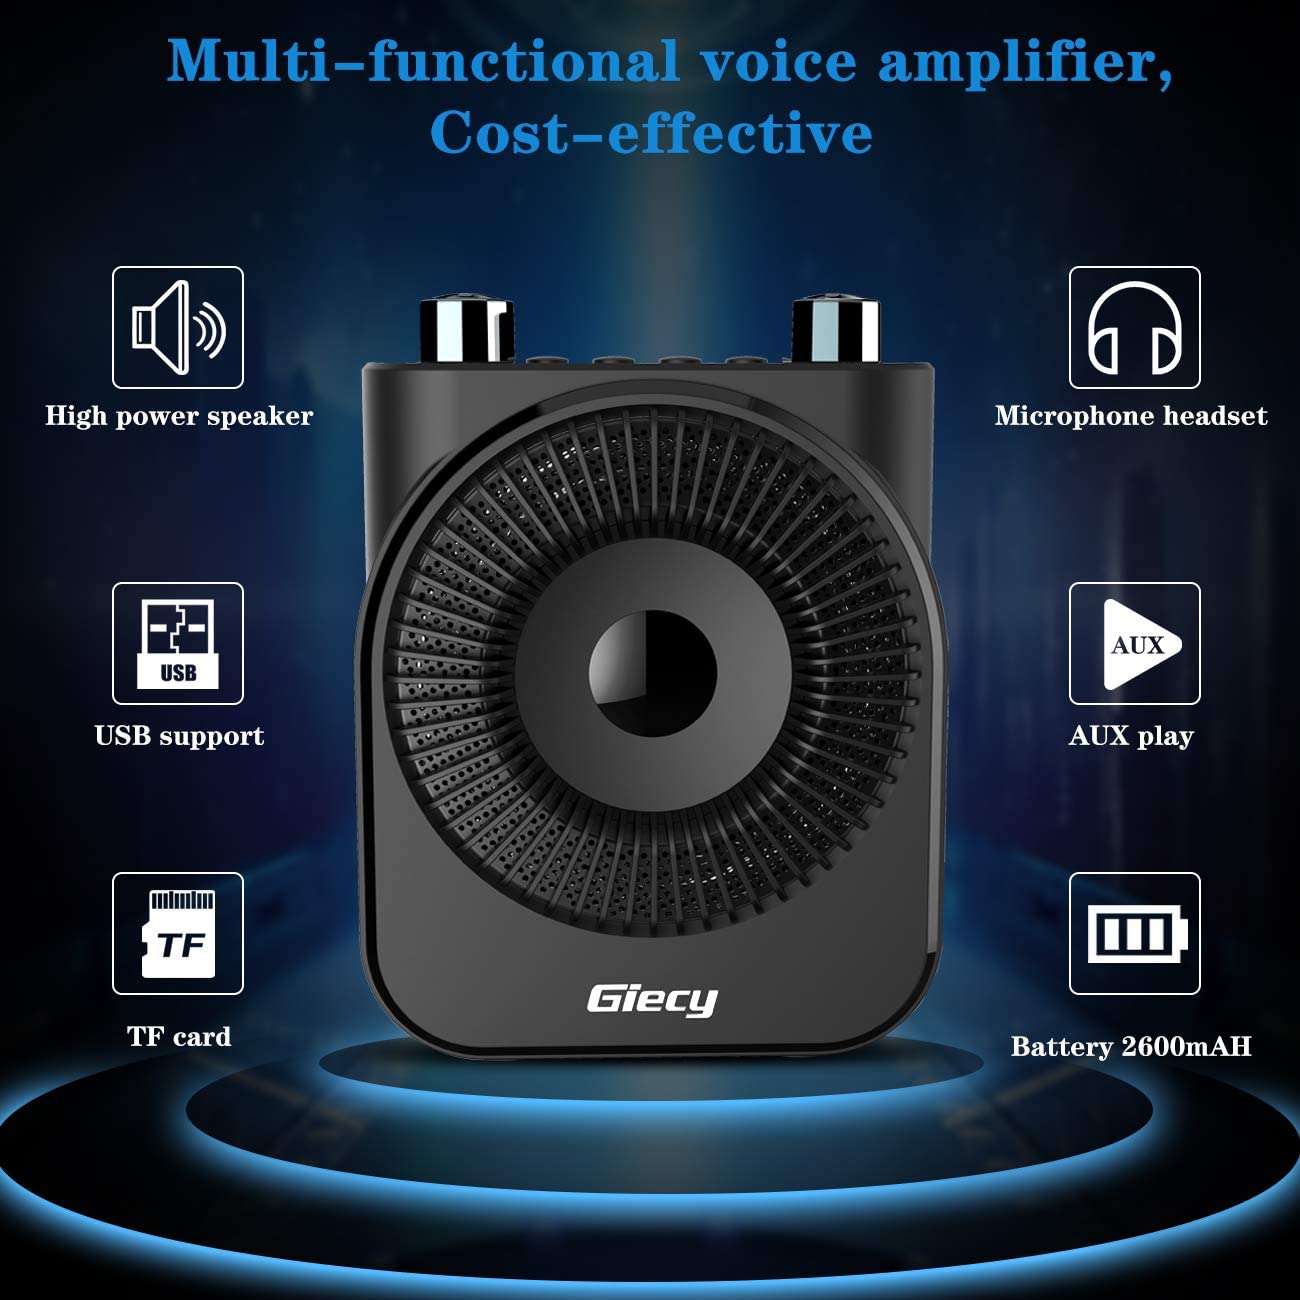 Giecy Voice Amplifier Portable 20W 2600mA Rechargeable with Wired Microphone Headset for Teachers Tour Guides,Meetings and Classroom